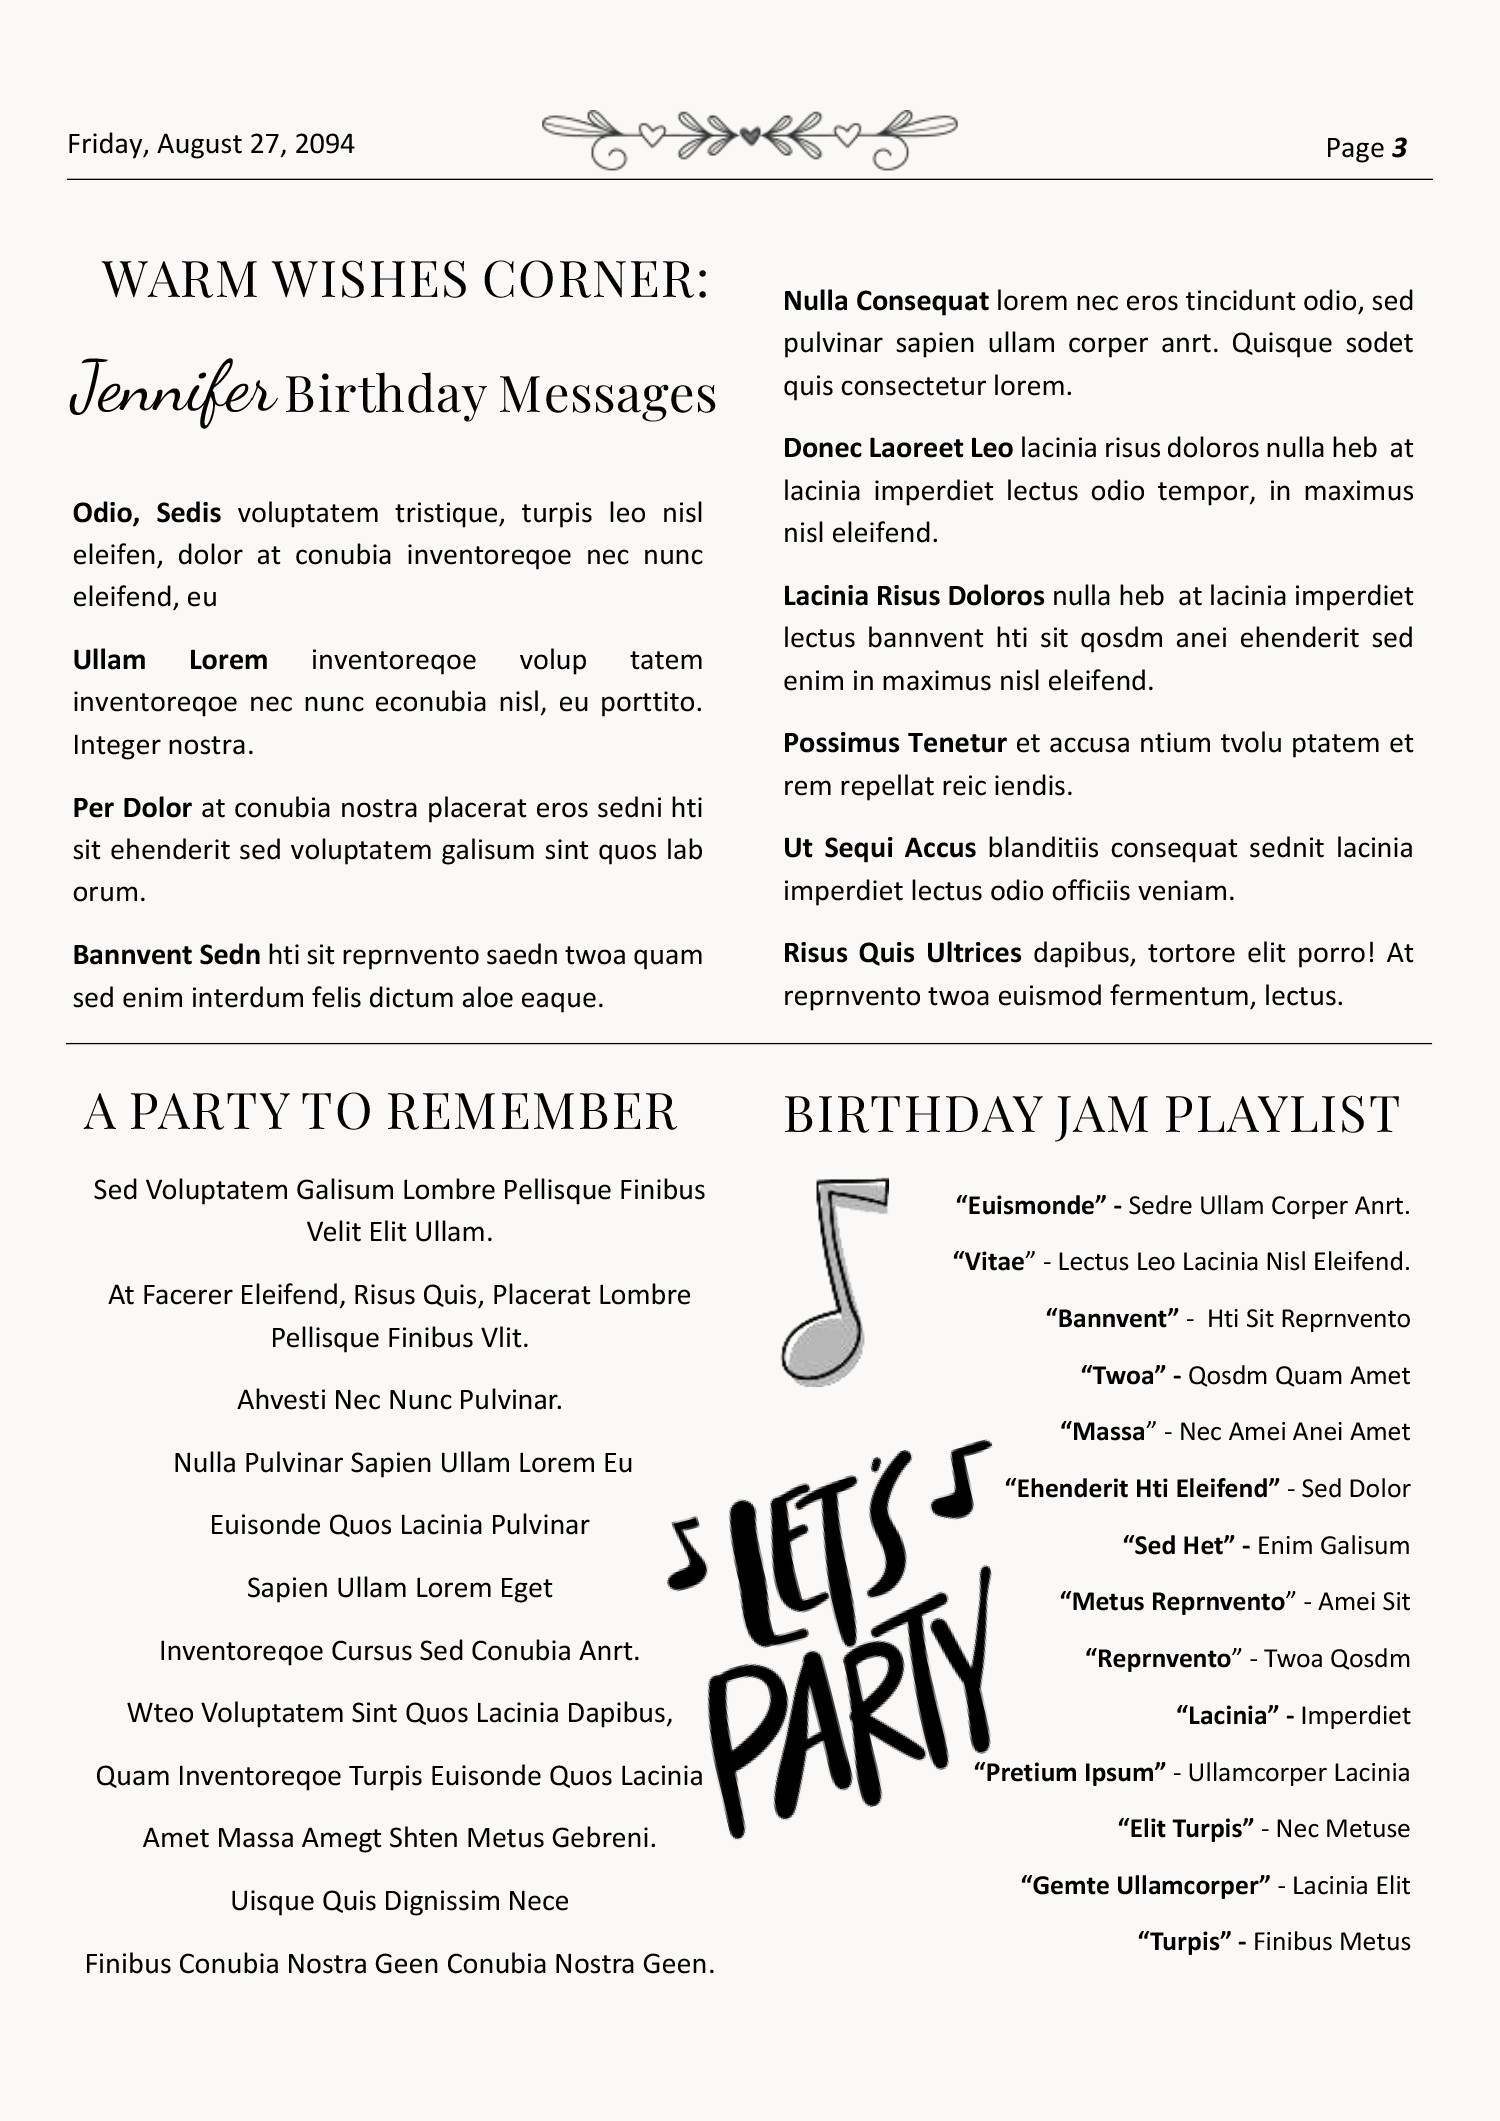 Black and White Birthday Newspaper Template - Page 03